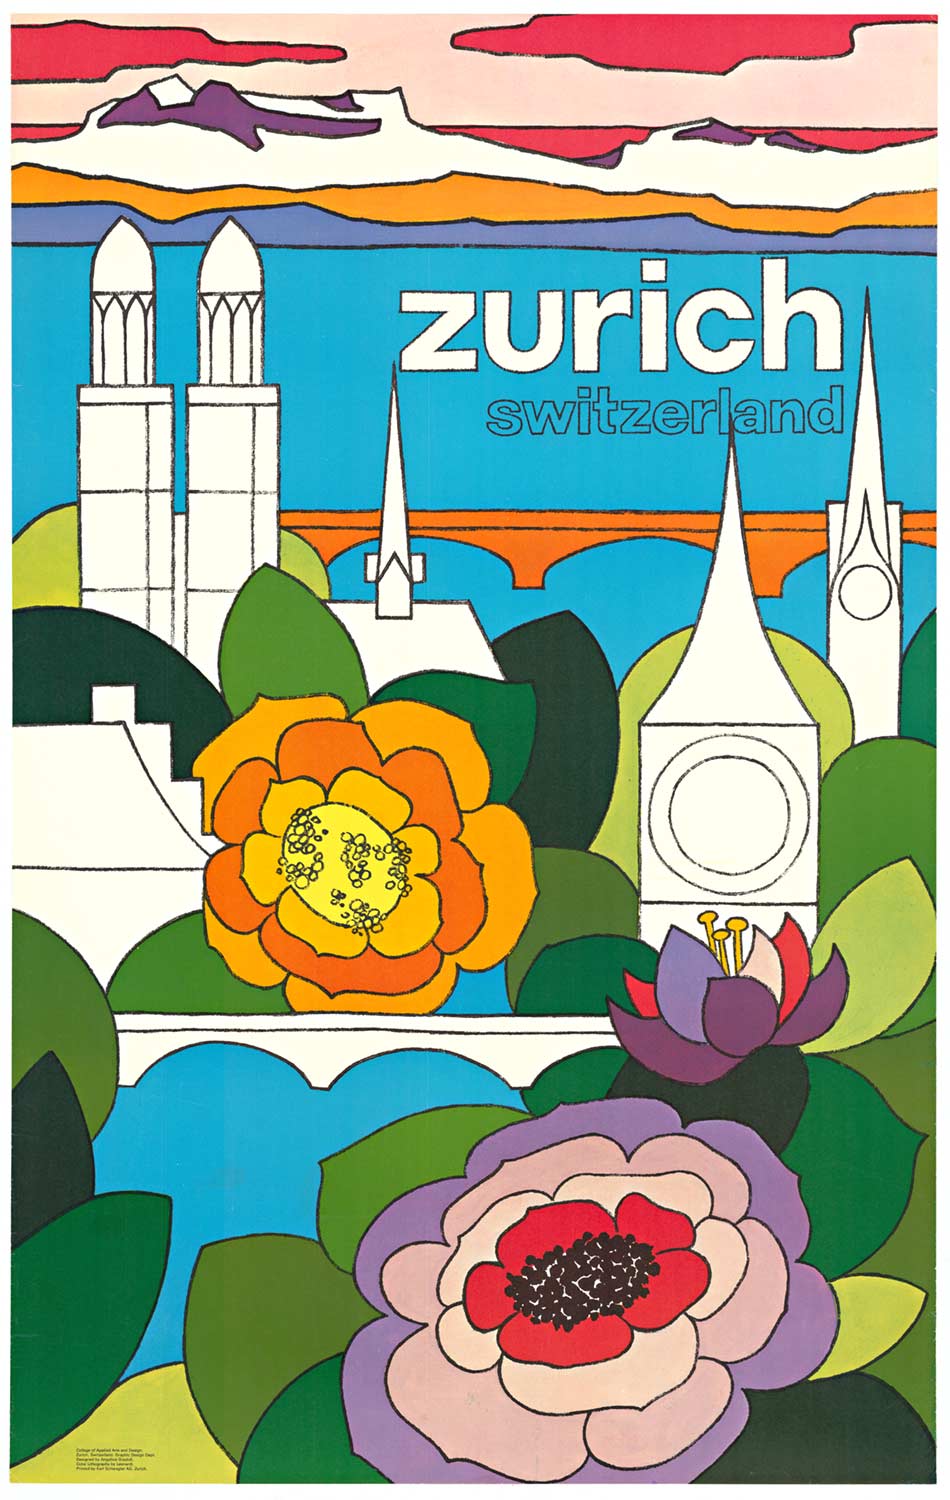 This original poster features a colorful psychedelic design by Angelica Grazioli from the College of Applied Arts and Design in Zurich. The image shows the towers and spires of Zurich emerging from between oversized flowers and an orange bridge crossing a